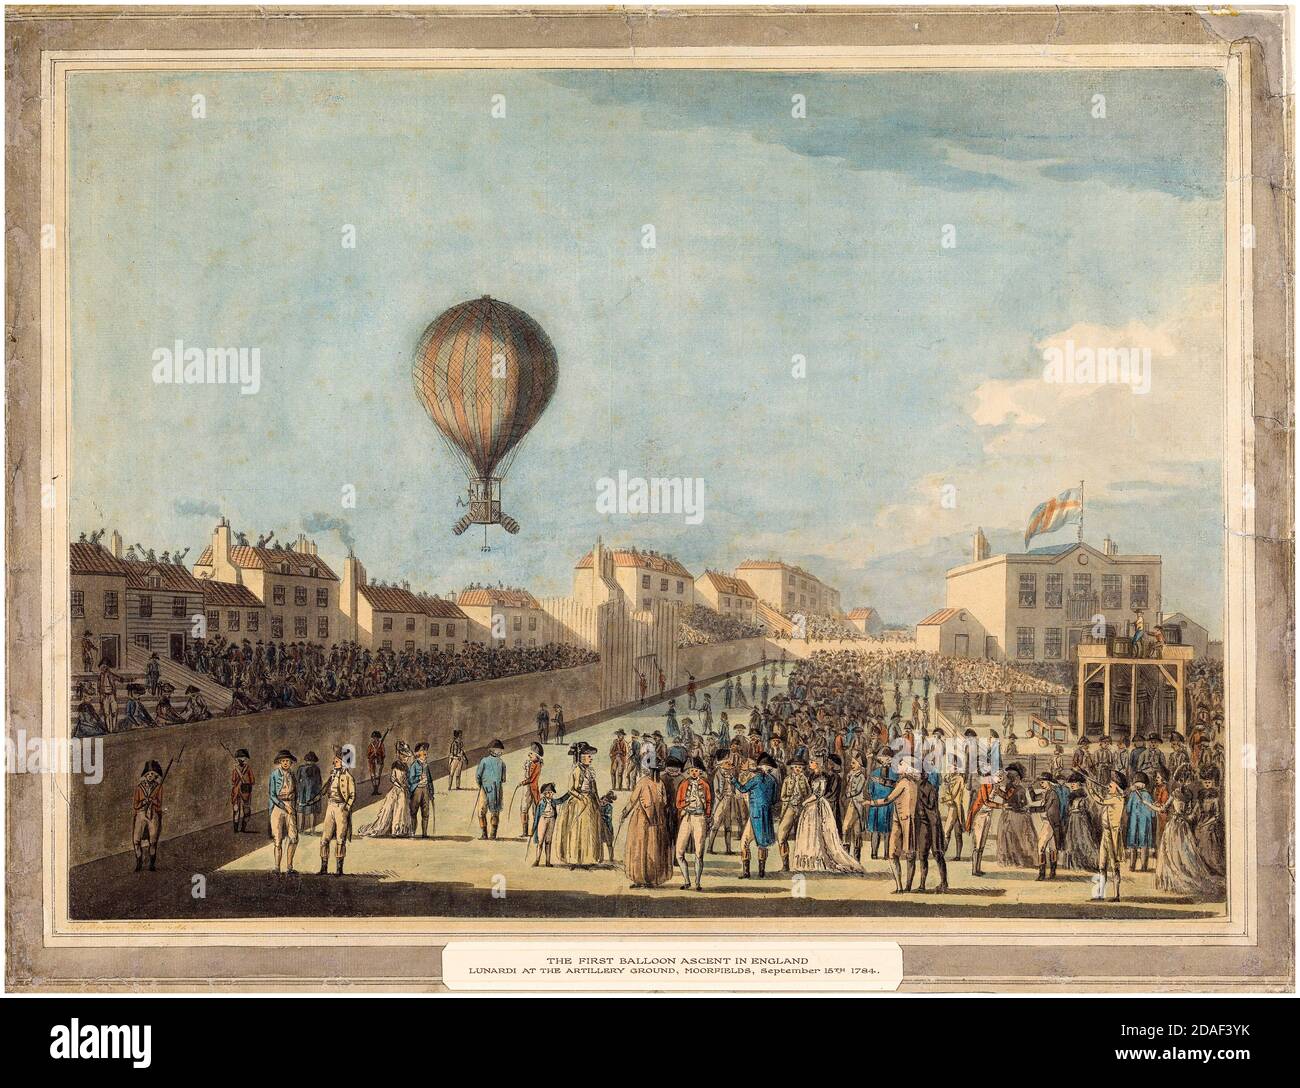 Francis Jukes, The first manned Balloon flight in England, 15th September 1784 achieved by Vincenzo Lunardi, print circa 1784 Stock Photo